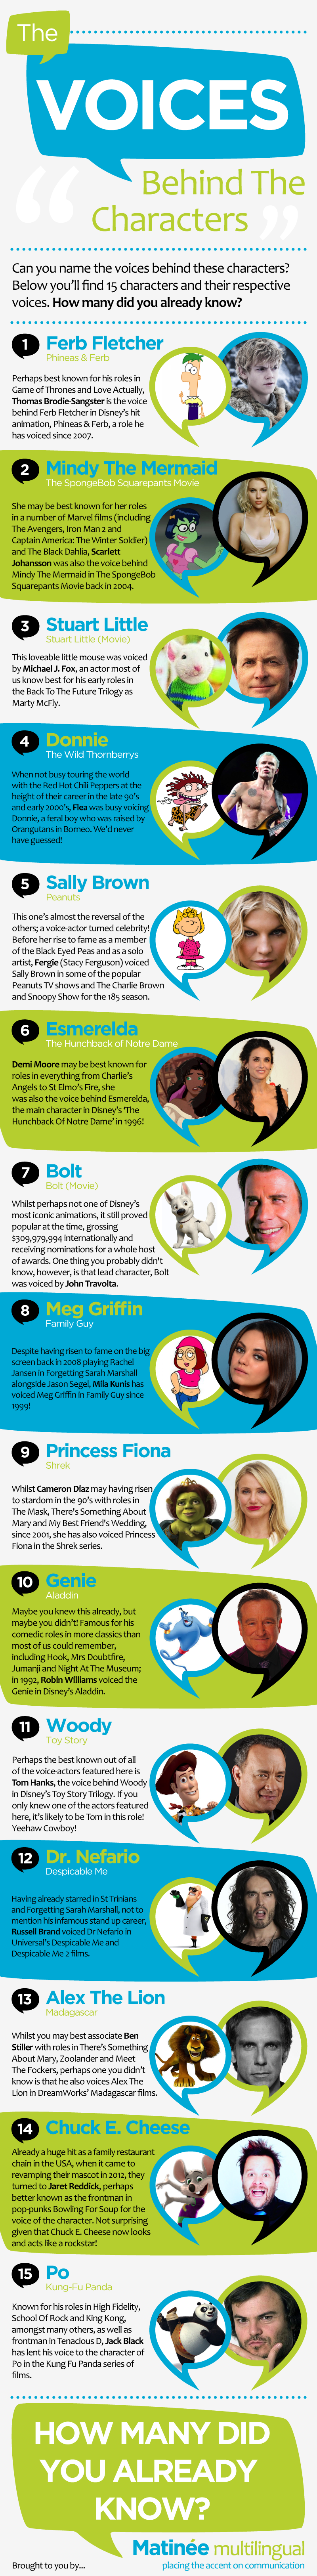 The Voices Behind The Characters - Infographic